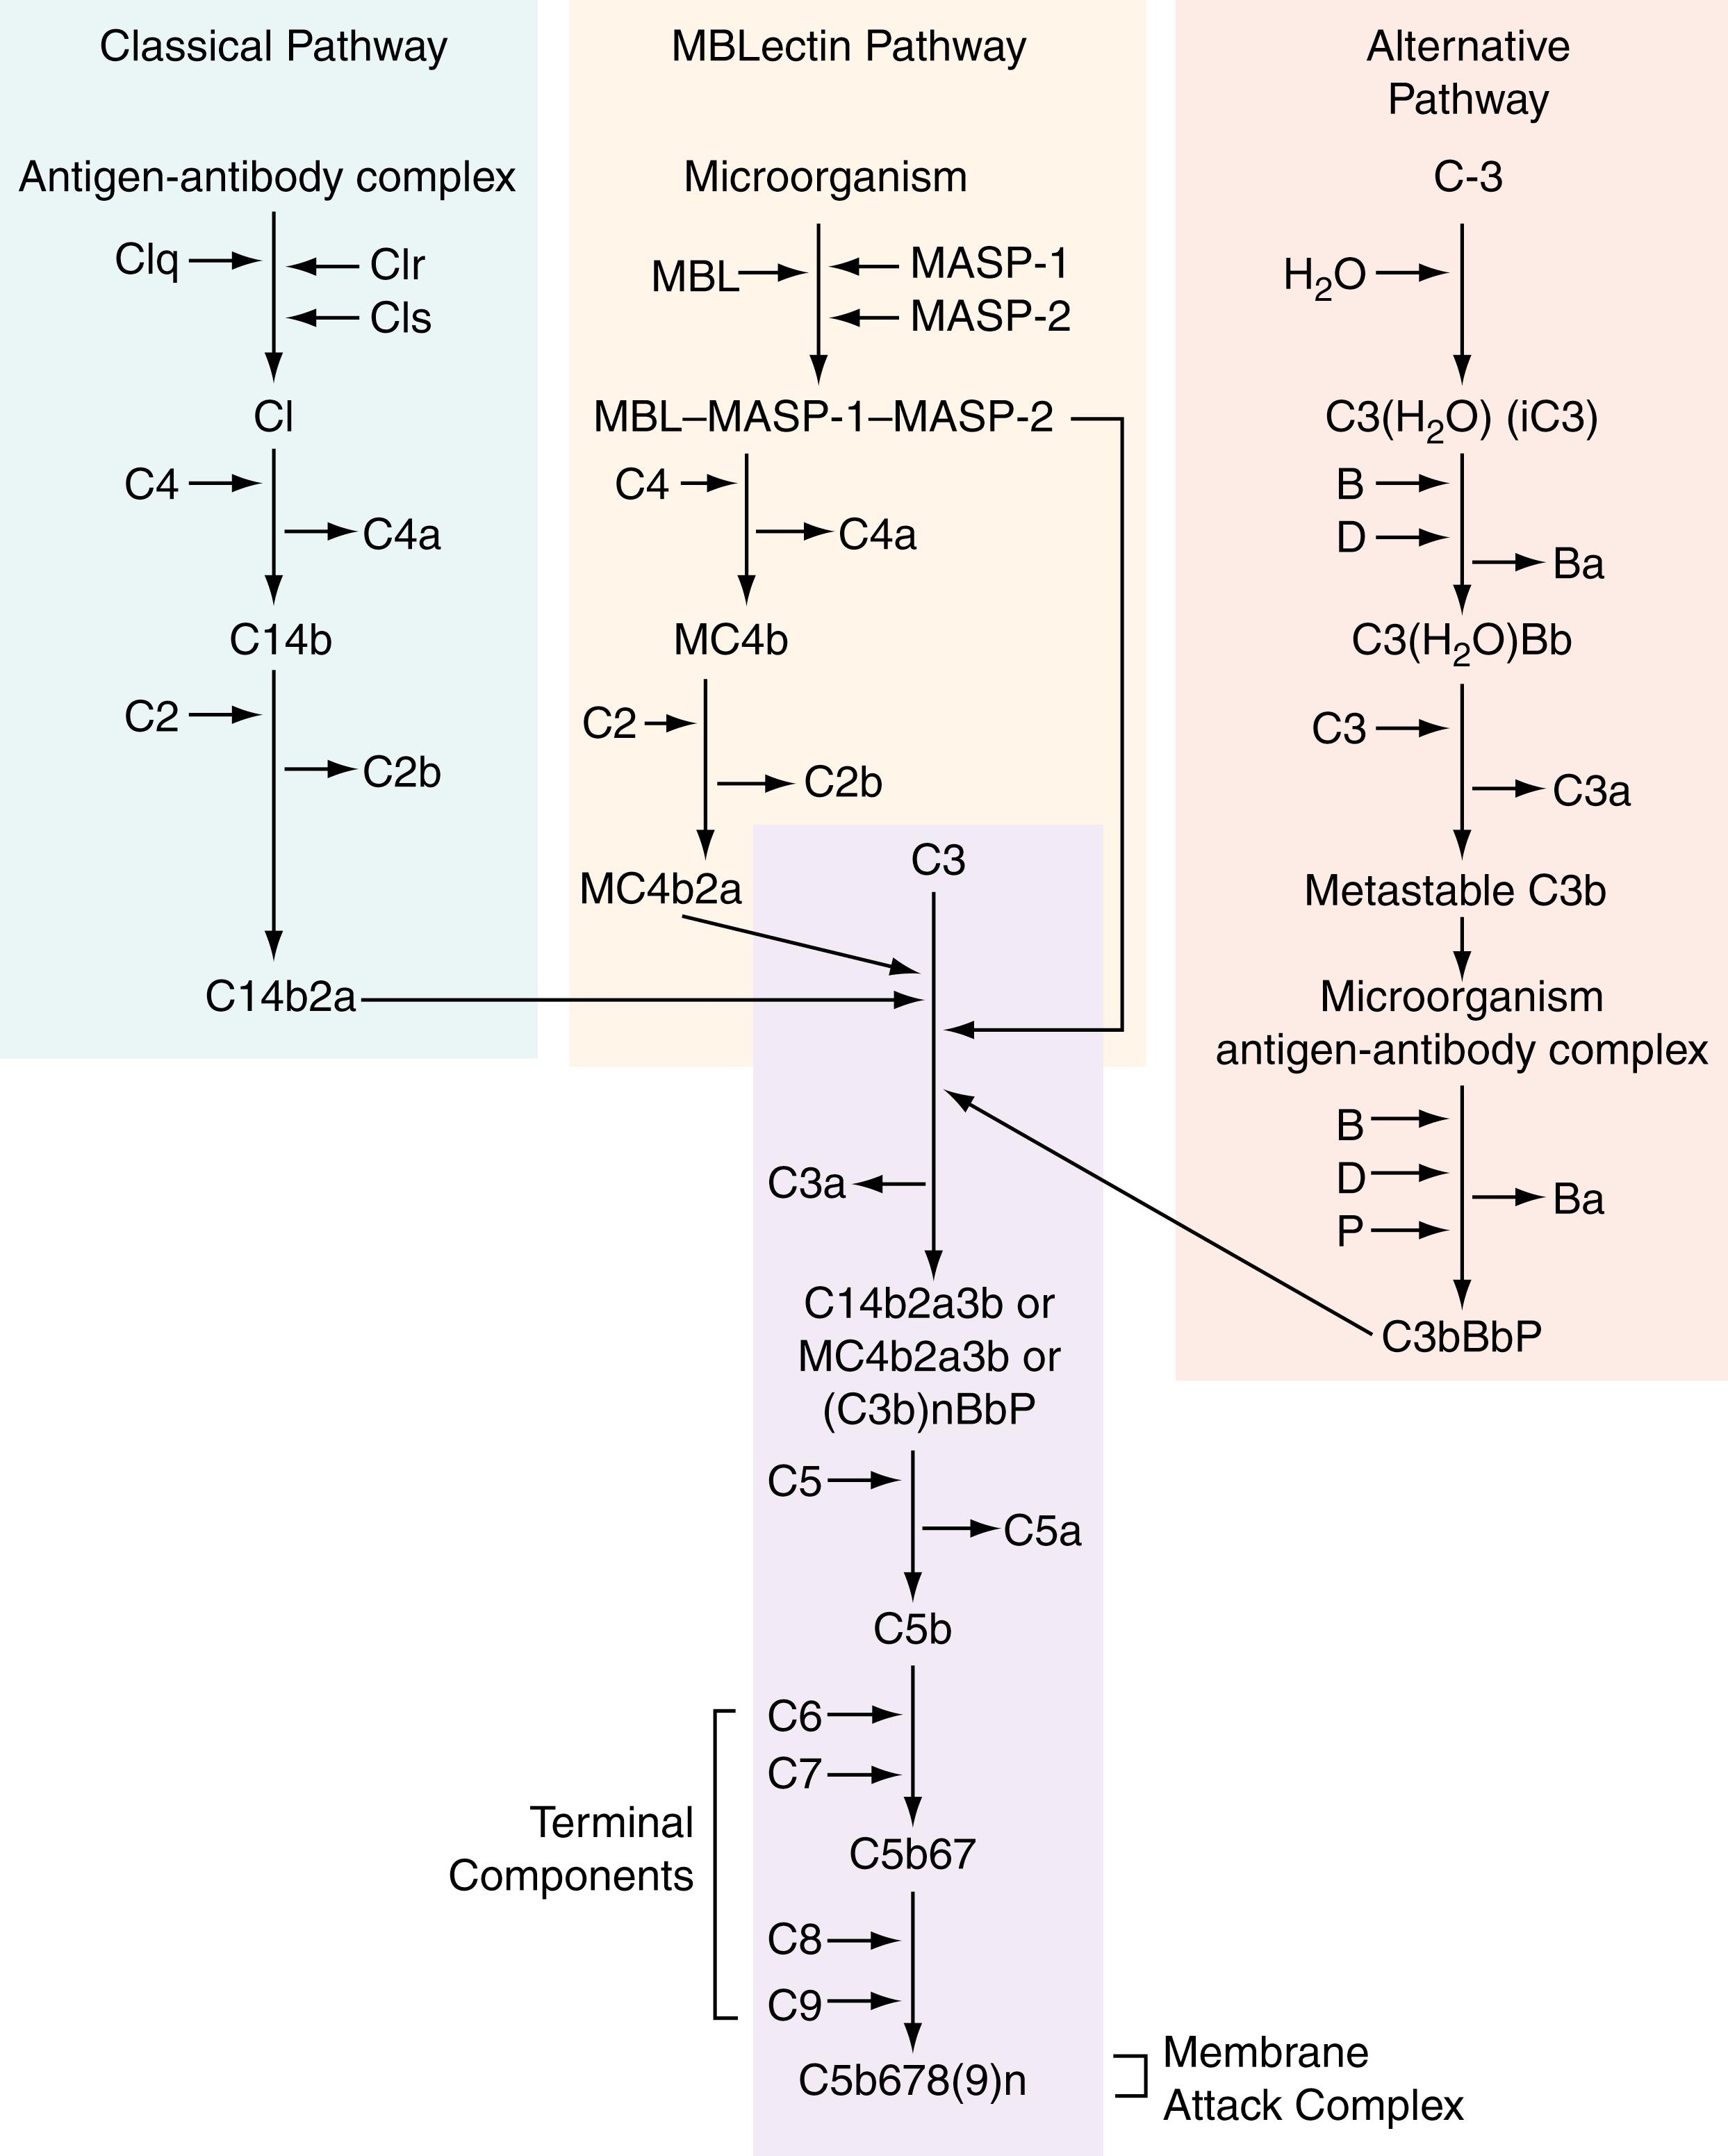 Figure 48.1, The three complement pathways (classical, MBLectin, and alternative) convene to create a convertase that will split C3. In the classical pathway, the immune complex will bind and trigger C1, then C4, and, finally, C2. In the MBLectin pathway, there is interaction between MBL with a carbohydrate group on a microorganism which will promote creation of the complex (MBL-MASP 1-MASP 2, denoted as “M” in the figure). This will complex with and activate C4 and C2. Within the alternative pathway, C3 has a thioester bond that is hydrolyzed, which prompts a conformational change. Thus, causing it to bind factor B (B), this will be cleaved by factor D (D), which will then form a convertase that is fortified by properdin (P). The C3 cleavage product, C3b, also has a thioester bond that is cleaved and able to activate the alternative complement pathway. The C3b convertase will continue to bind and activate later complement components until the activation pathway is at an end. MASP, MBL-associated serine proteases; MBL, mannose binding lectin